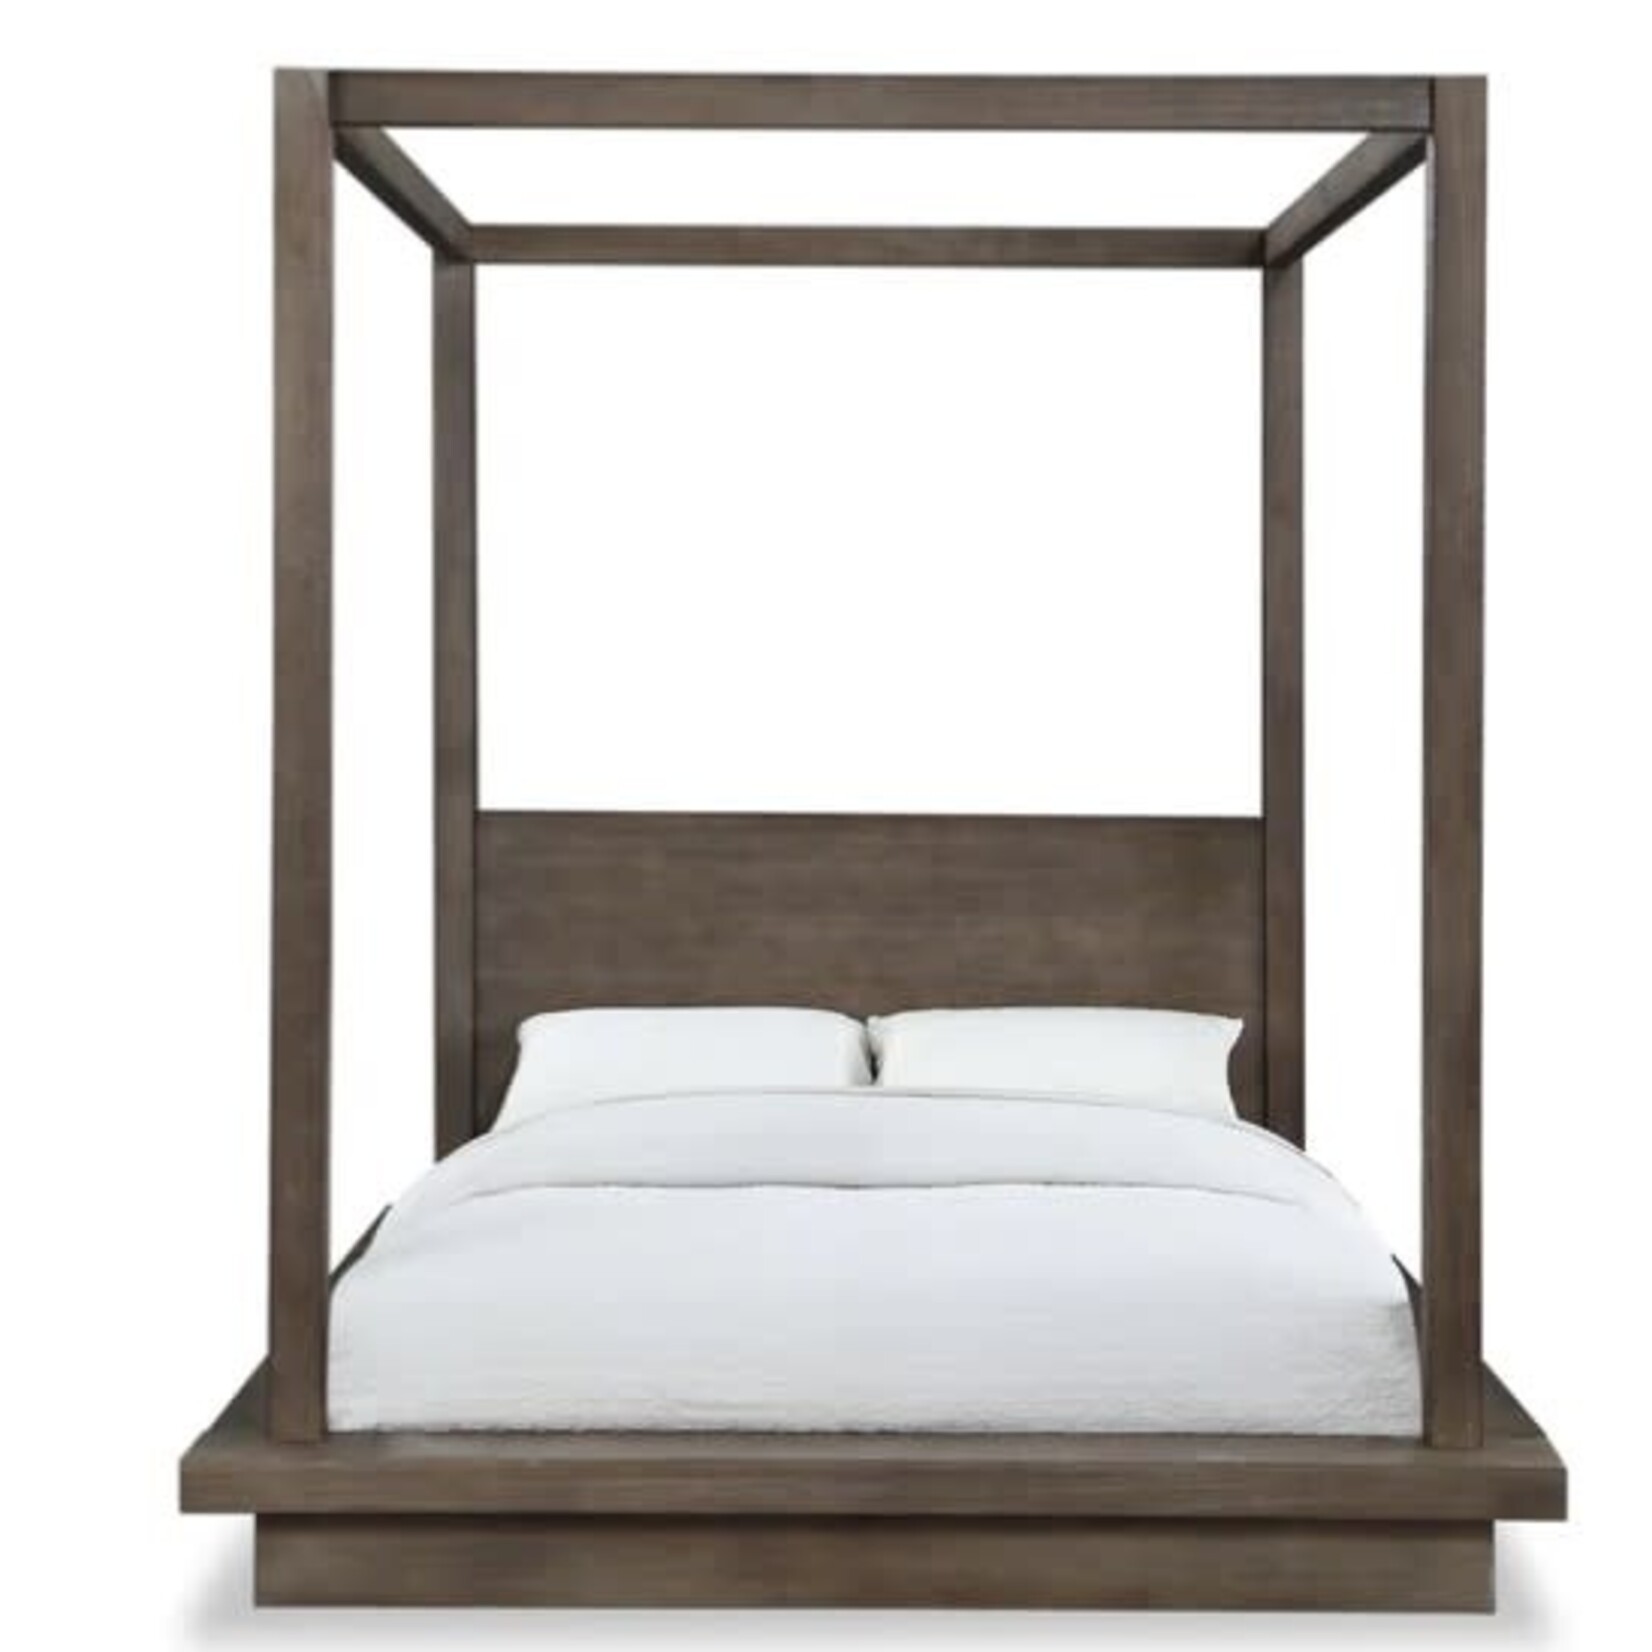 Mickler & Co. Milton Wooden Canopy Bed